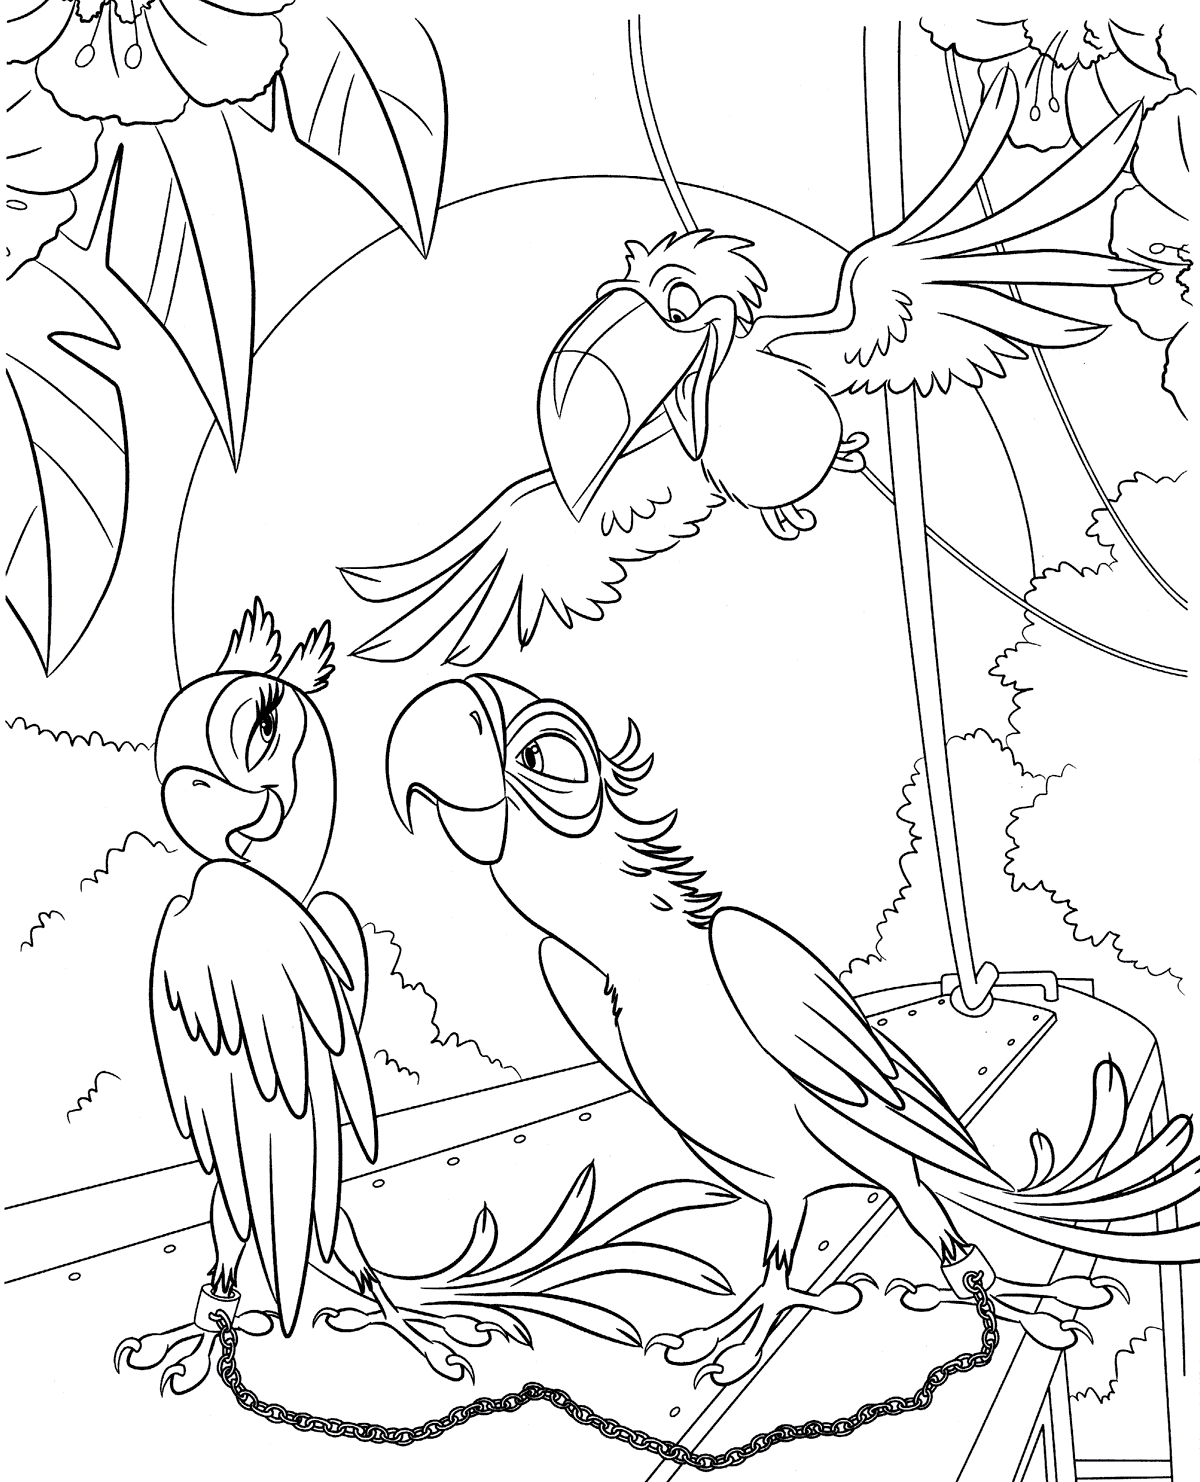 Rio Perla Blu coloring page - free printable coloring pages on coloori.com